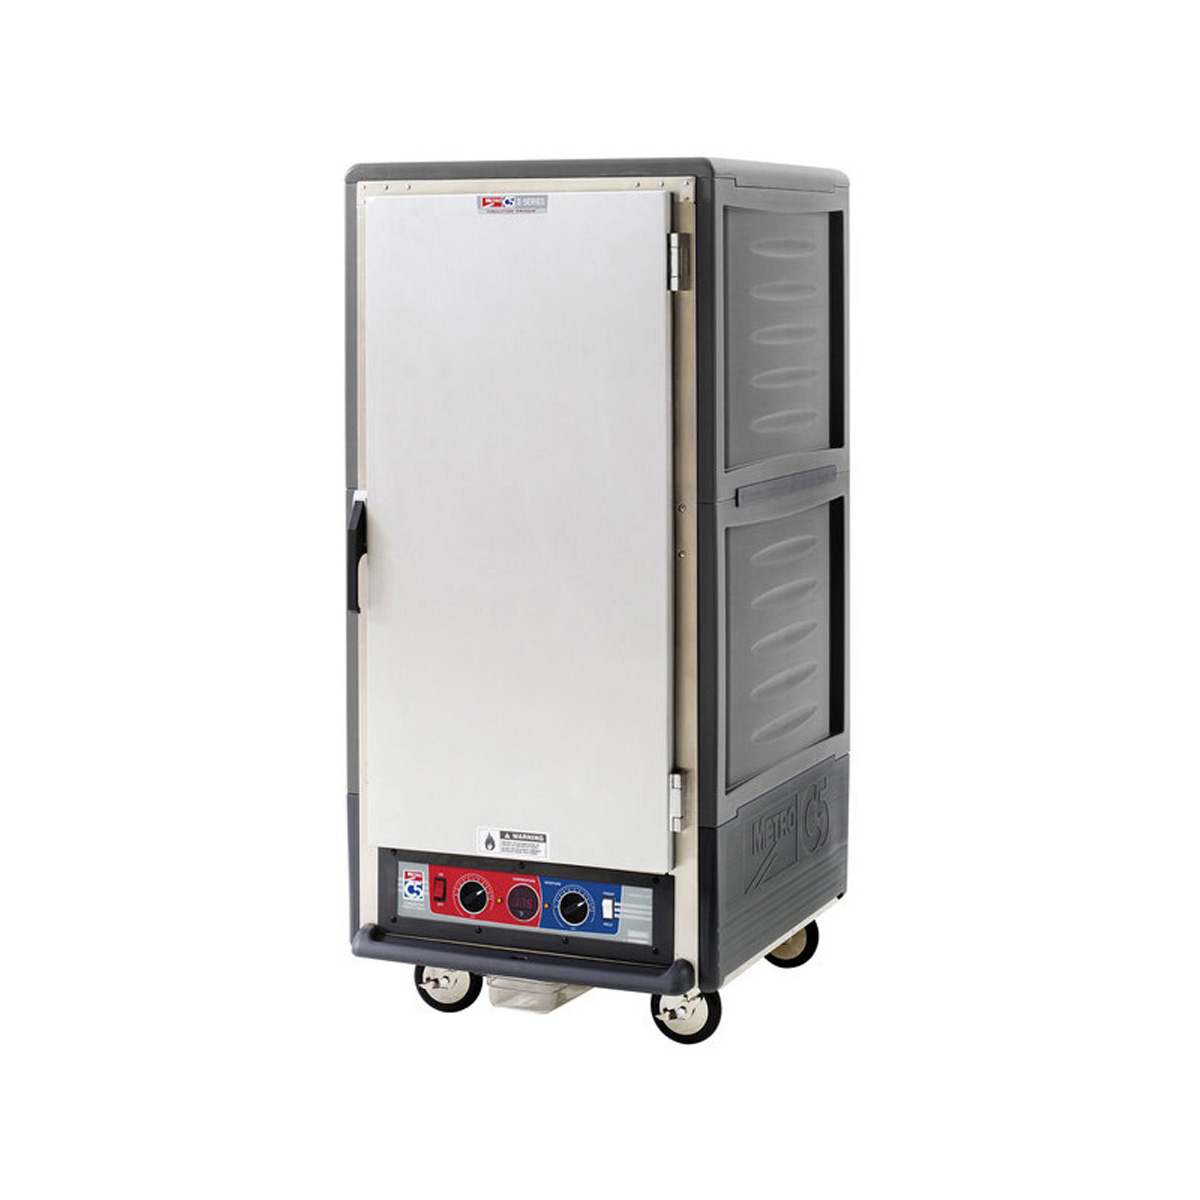 Metro C537-CLFS-U-GY C5 3 Series Insulated Mobile Proofing and Holding Cabinet